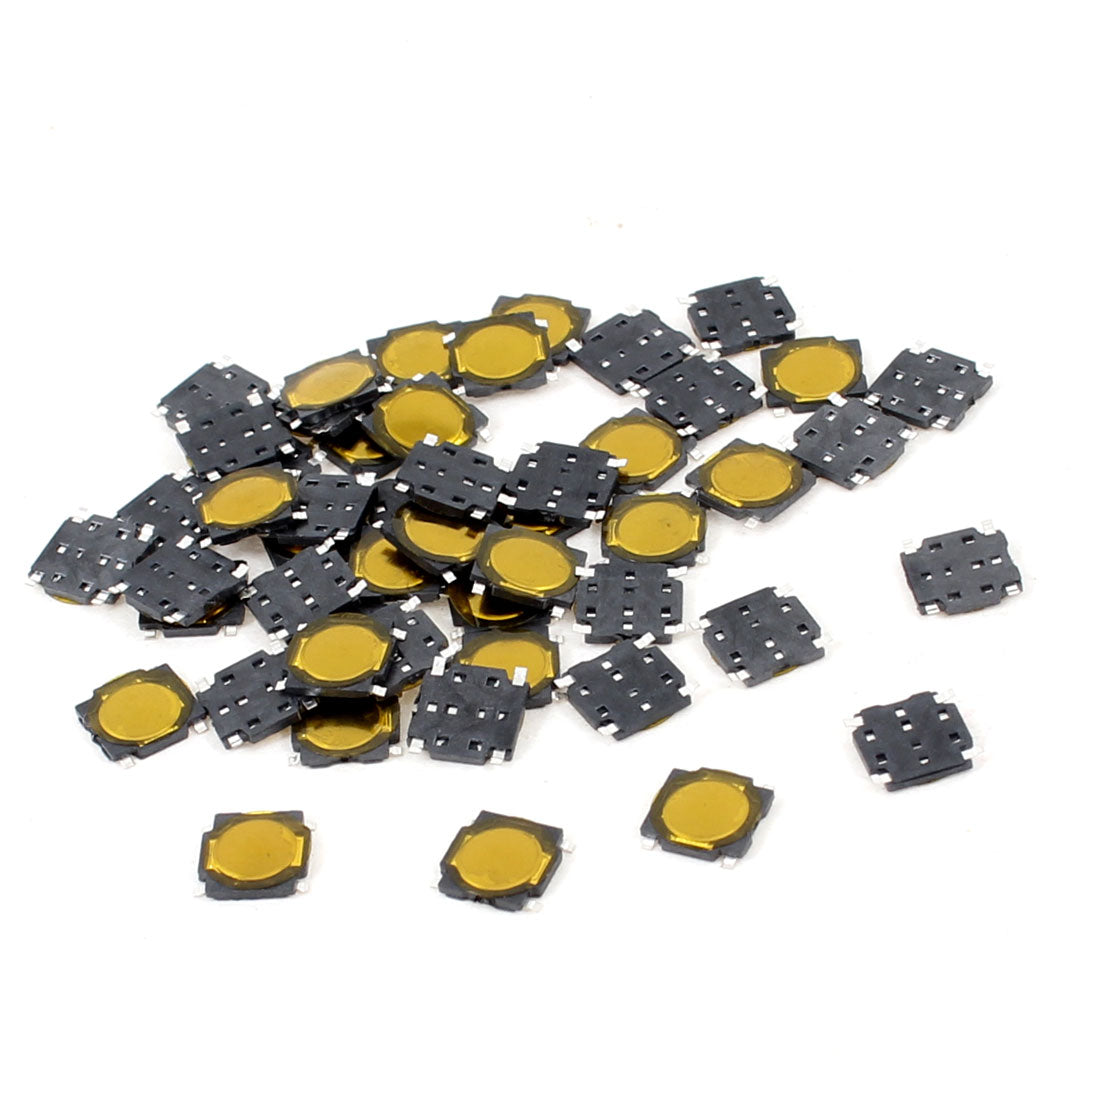 uxcell Uxcell 50 Pcs 4.5x4.5x0.5mm 4 Pins Momentary Push Button Surface Mounted Devices SMT Tactile Tact Switch